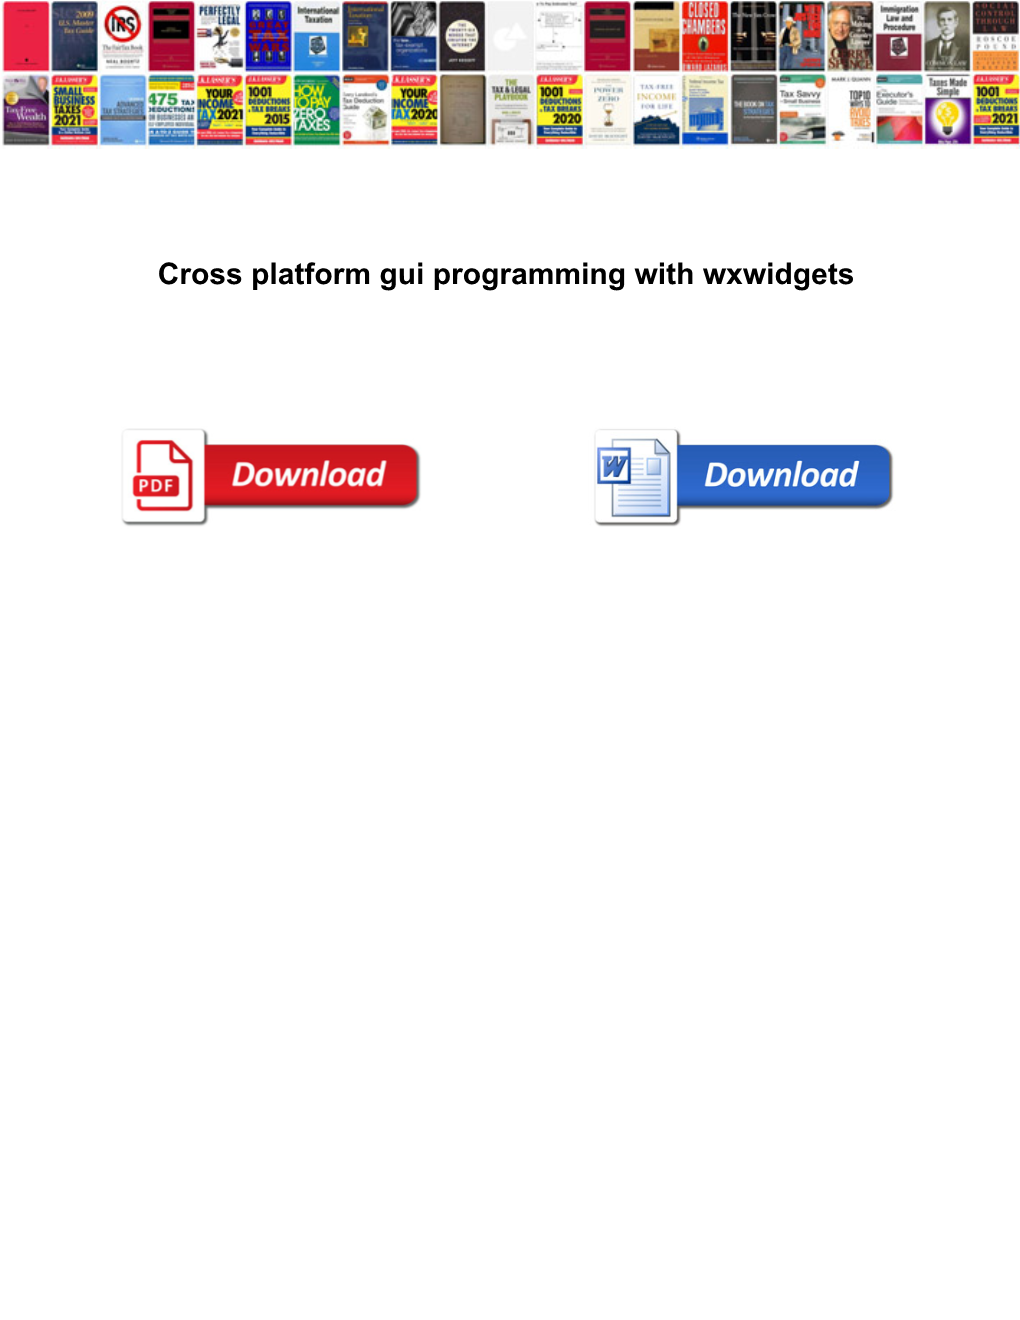 Cross Platform Gui Programming with Wxwidgets Cross Platform Gui Programming with Wxwidgets Pdf and Rptools in a Non-Technical Manner